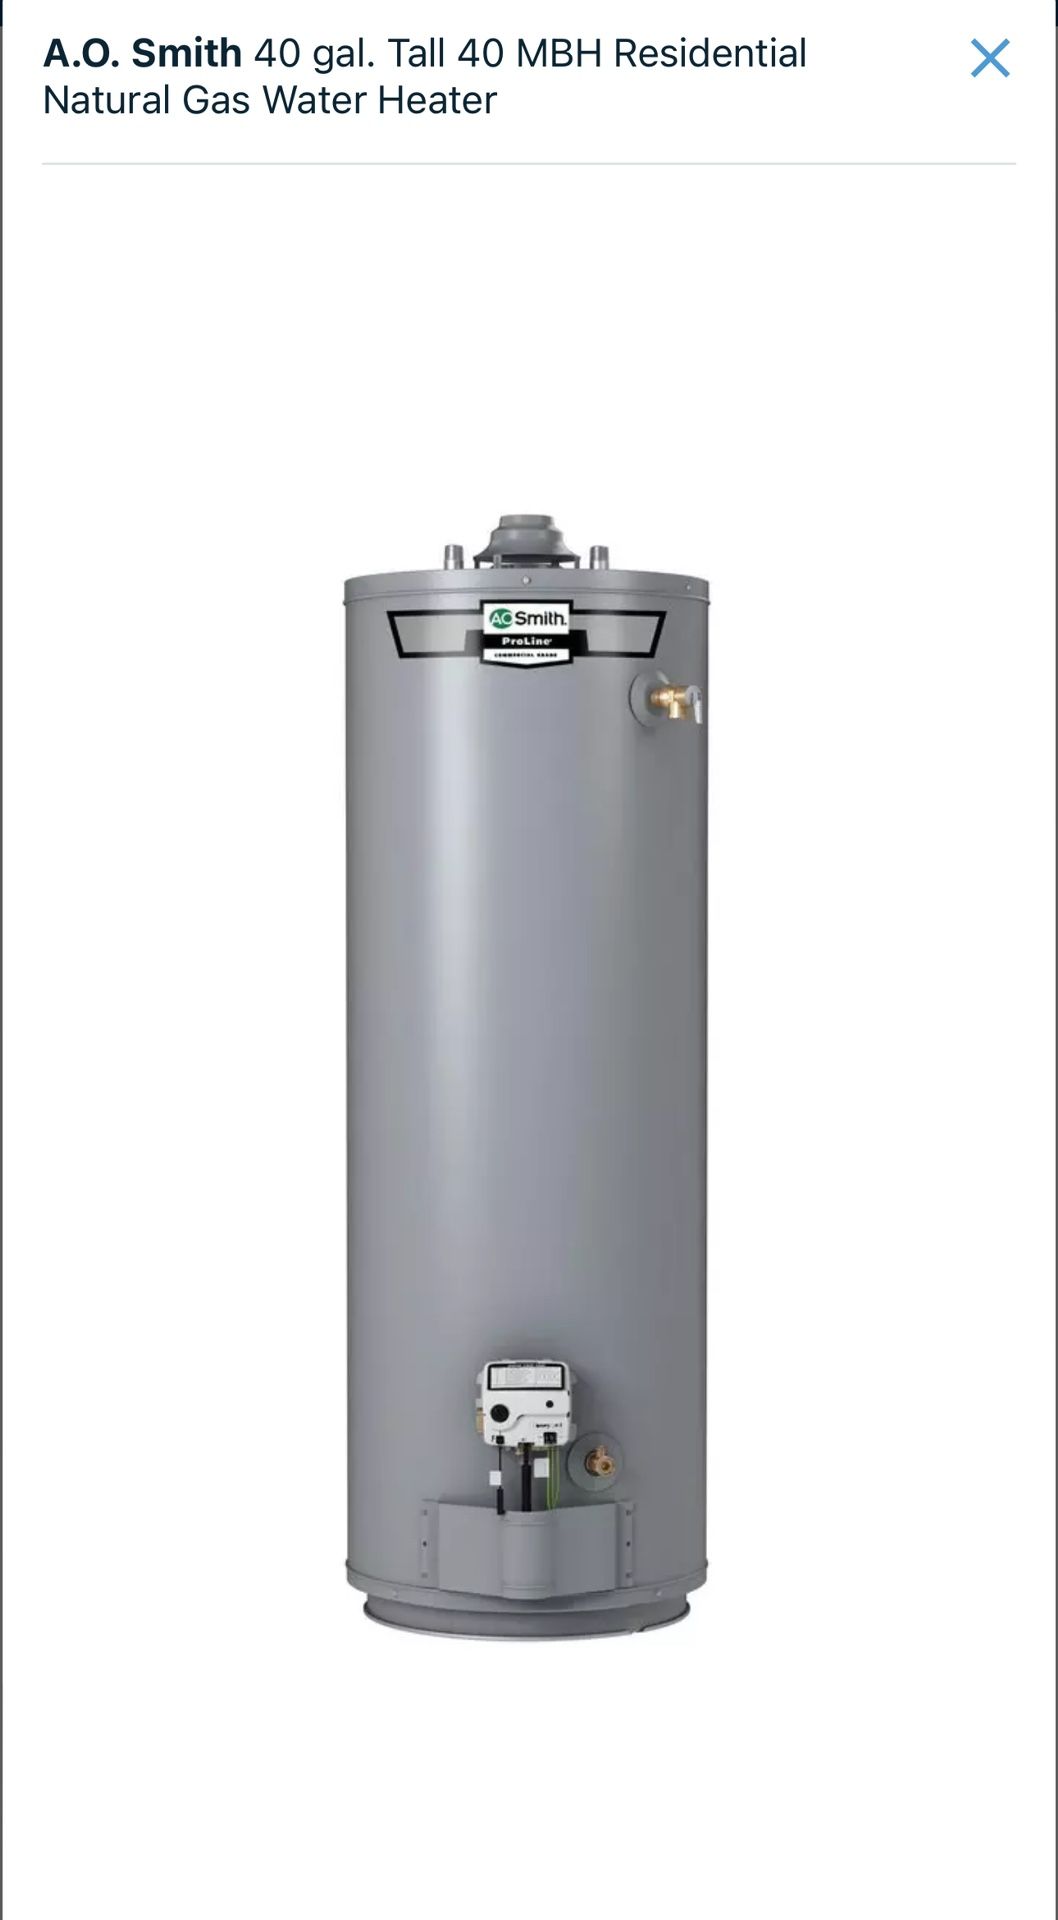 A.O. Smith ProLine® 40 gal. Tall 40 MBH Residential Natural Gas Water Heater